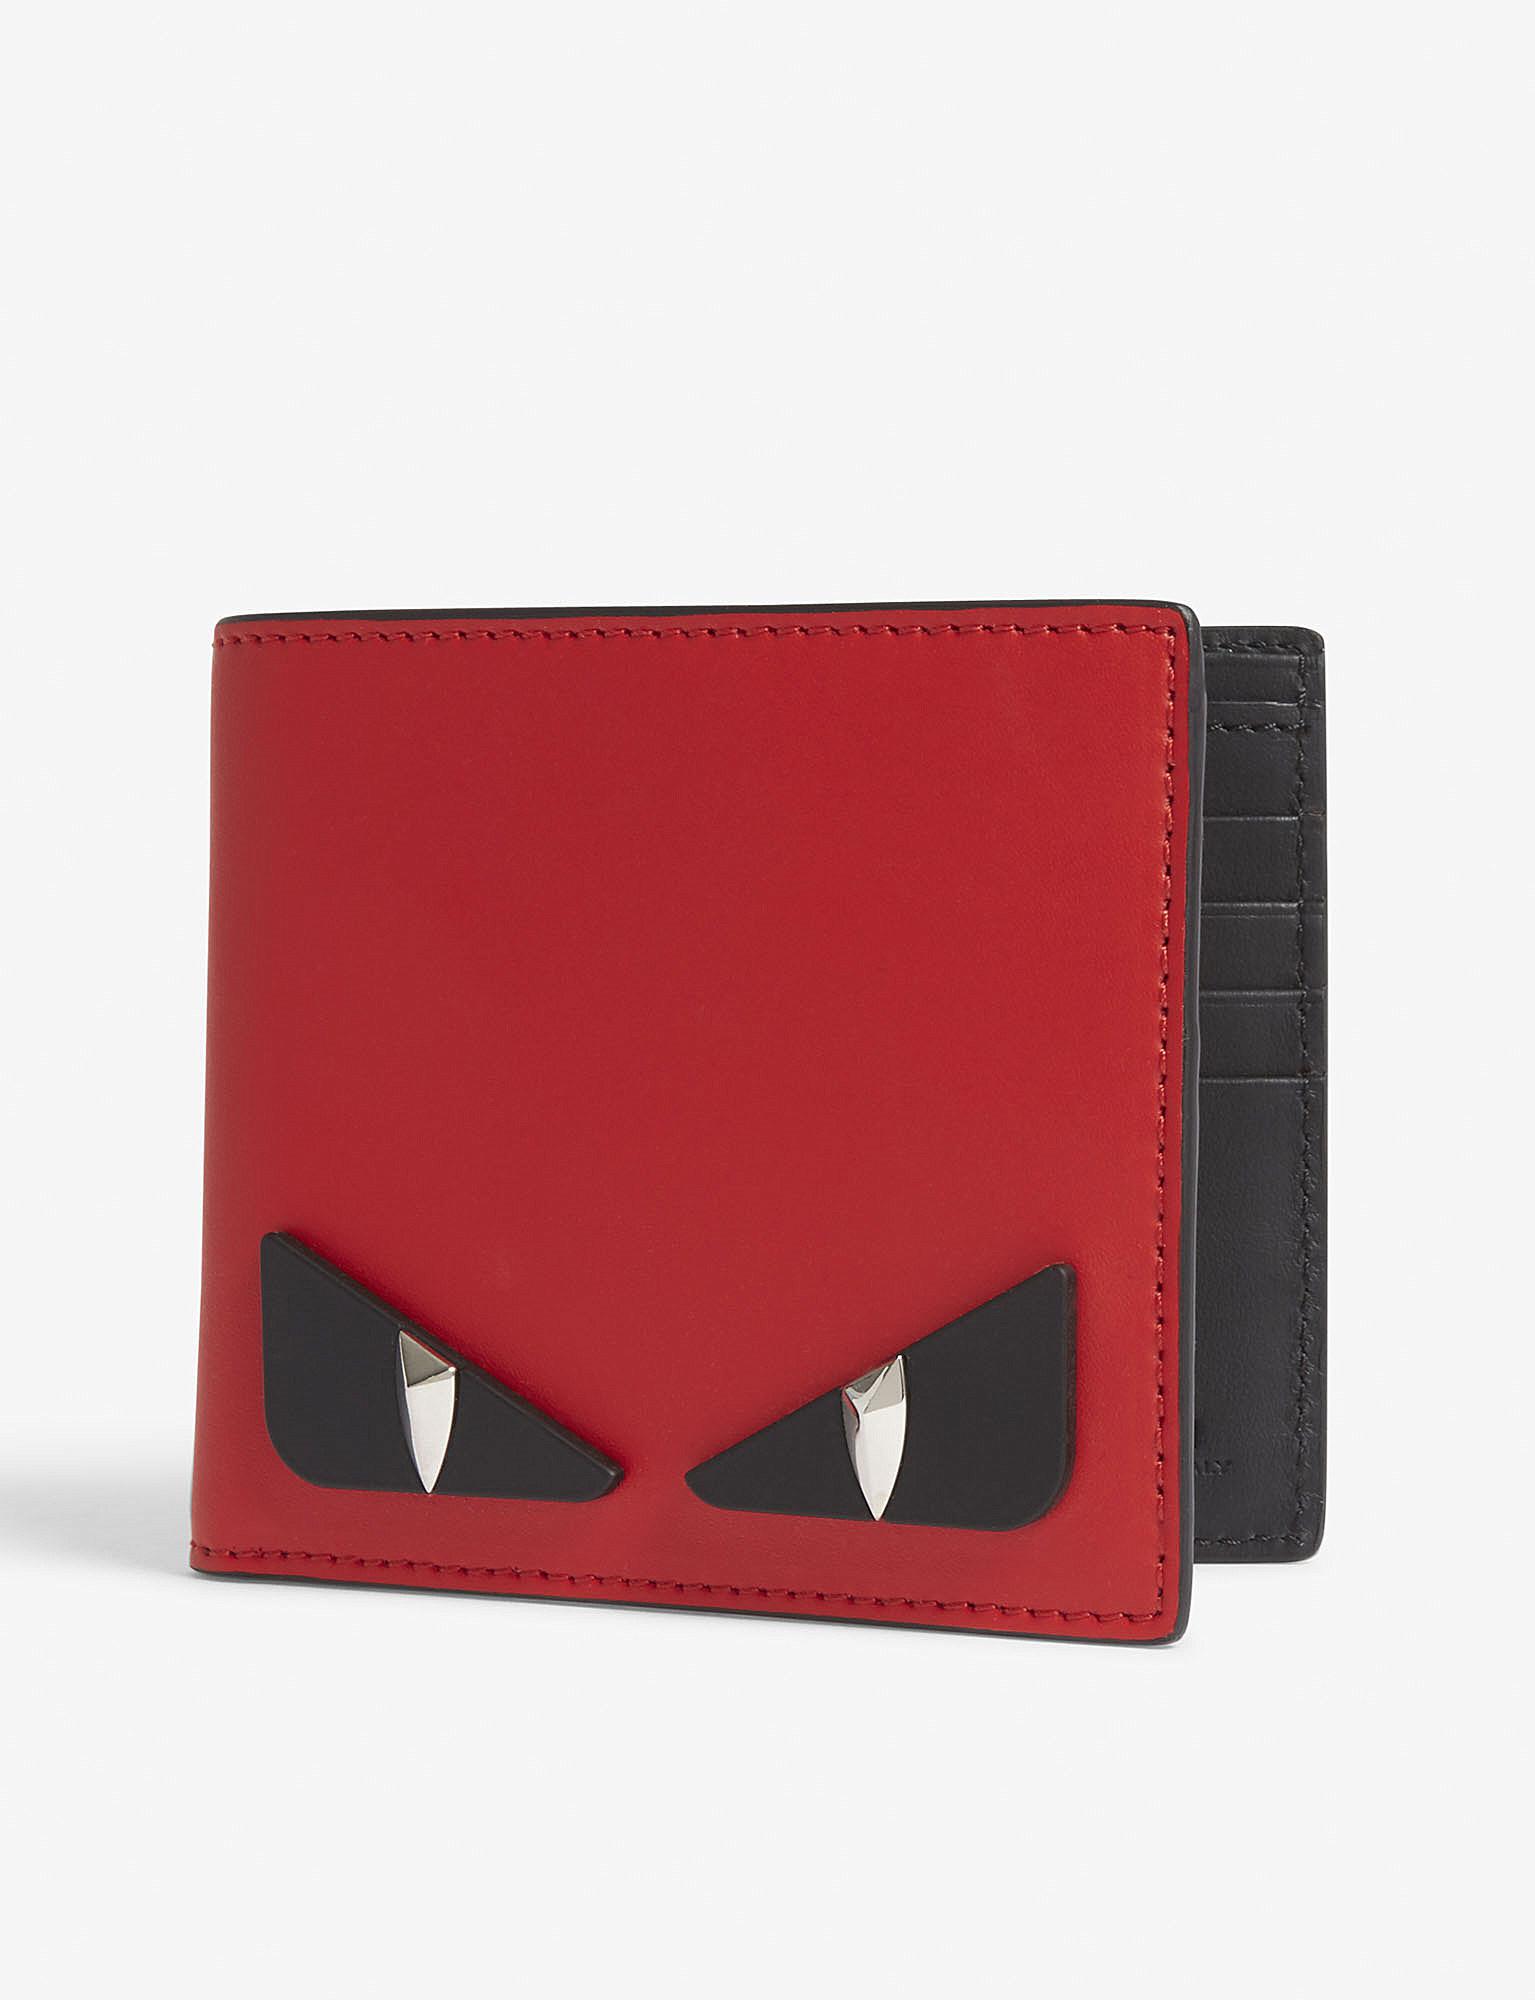 Purchase \u003e fendi wallet red, Up to 74% OFF